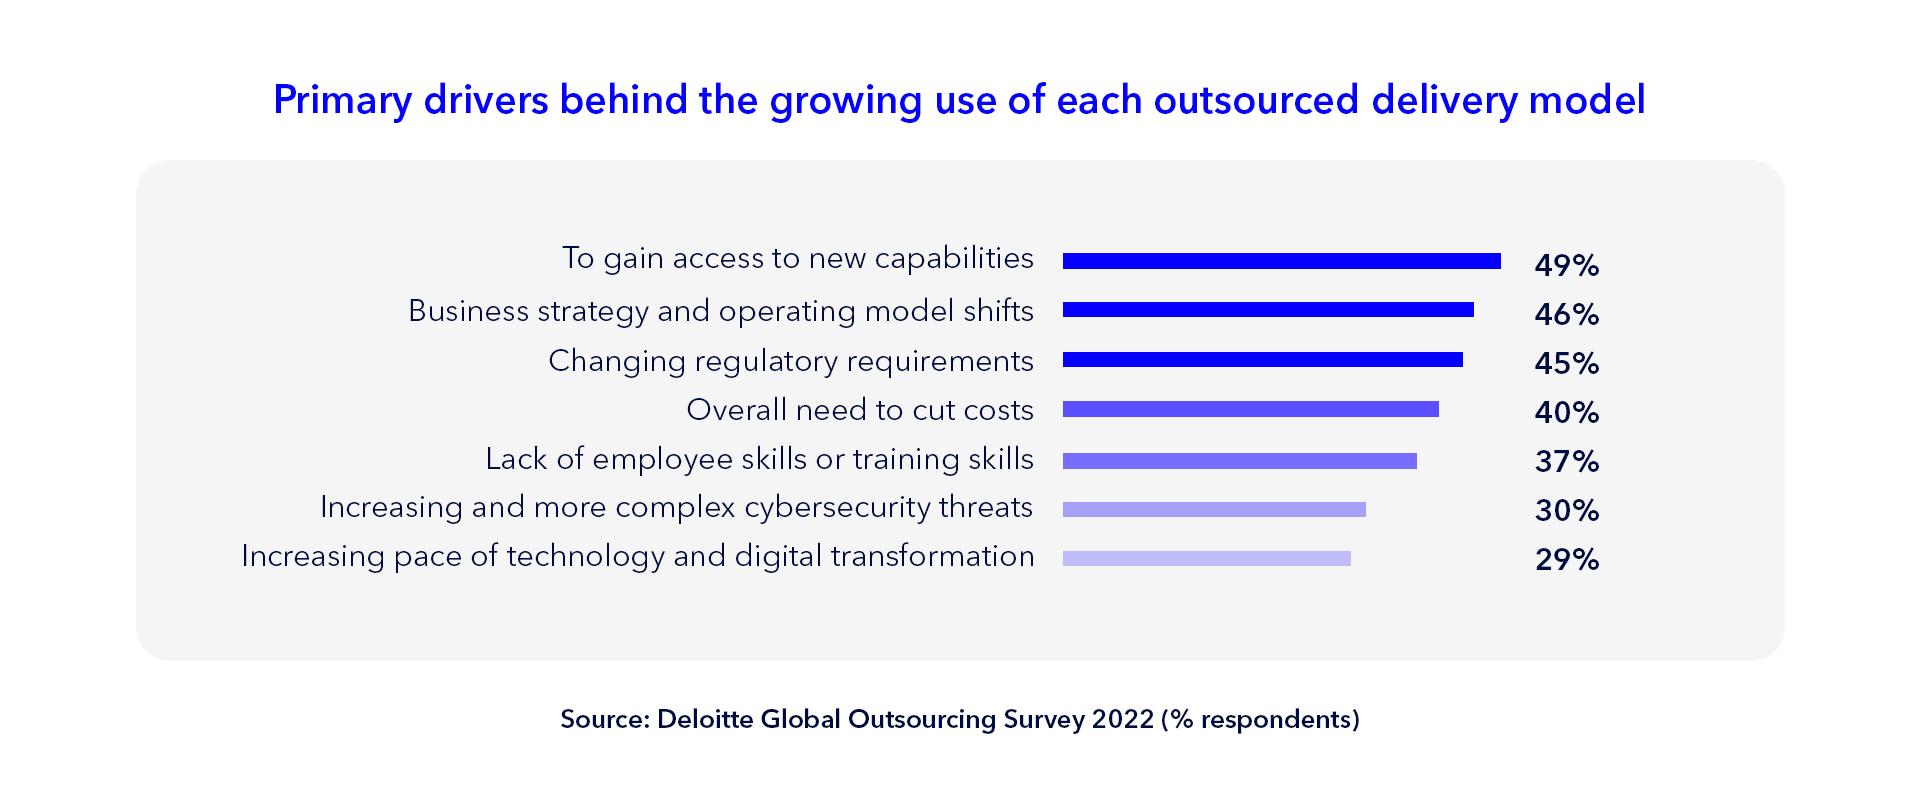 Primary drivers behind the growing use of each outsourced delivery model: To gain access to new capabilities (49%), Business strategy and operating model shifts (46%), Changing regulatory requirements (45%), Overall need to cut costs (40%), Lack of employee skills or training skills (37%). Source: Deloitte Global Outsourcing Survey 2022